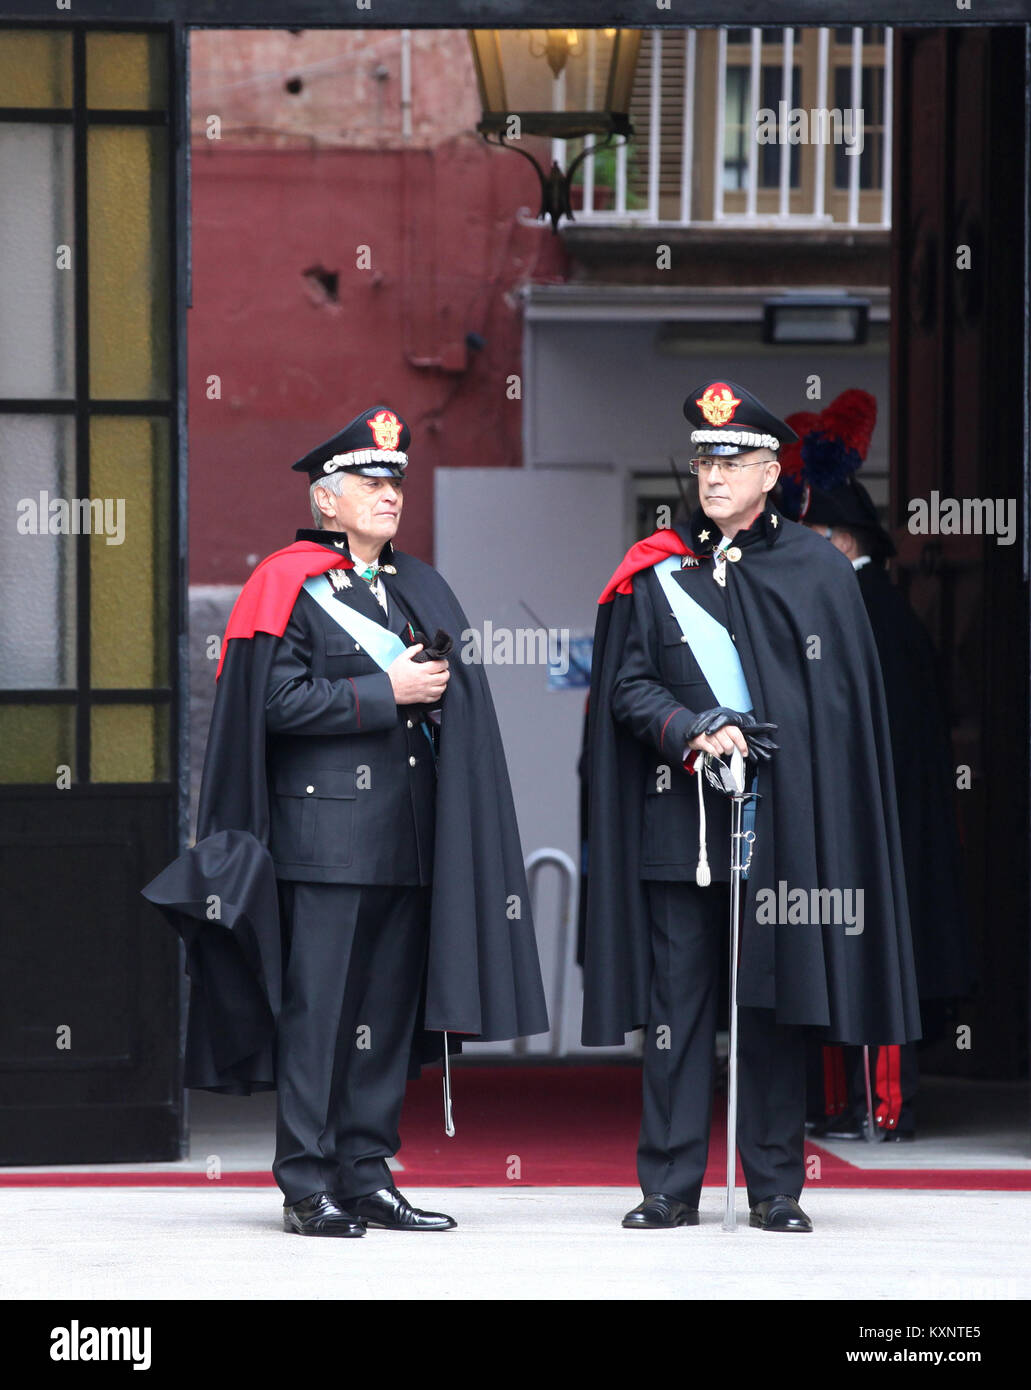 January 11, 2018 - the general commander of the firearms of the Carabinieri Tullio Del Sette, together with the Generali Vittori Tommasone and Giovanni Nistri during the change of guard at the top of the commandos.Naples, Italy - Naples: change at the top of the ''Ogaden'' Carabinieri Inter-regional Command.This morning was held in Naples the ceremony of rotation of the Commander Carabinieri ''Ogaden''.At the General of the Army Corps Giovanni Nistri, Commander of the Summit from 6 April 2016, the paratroop Vittorio Tomasone takes over. General Nistri leaves, after 21 months, the Interregion Stock Photo